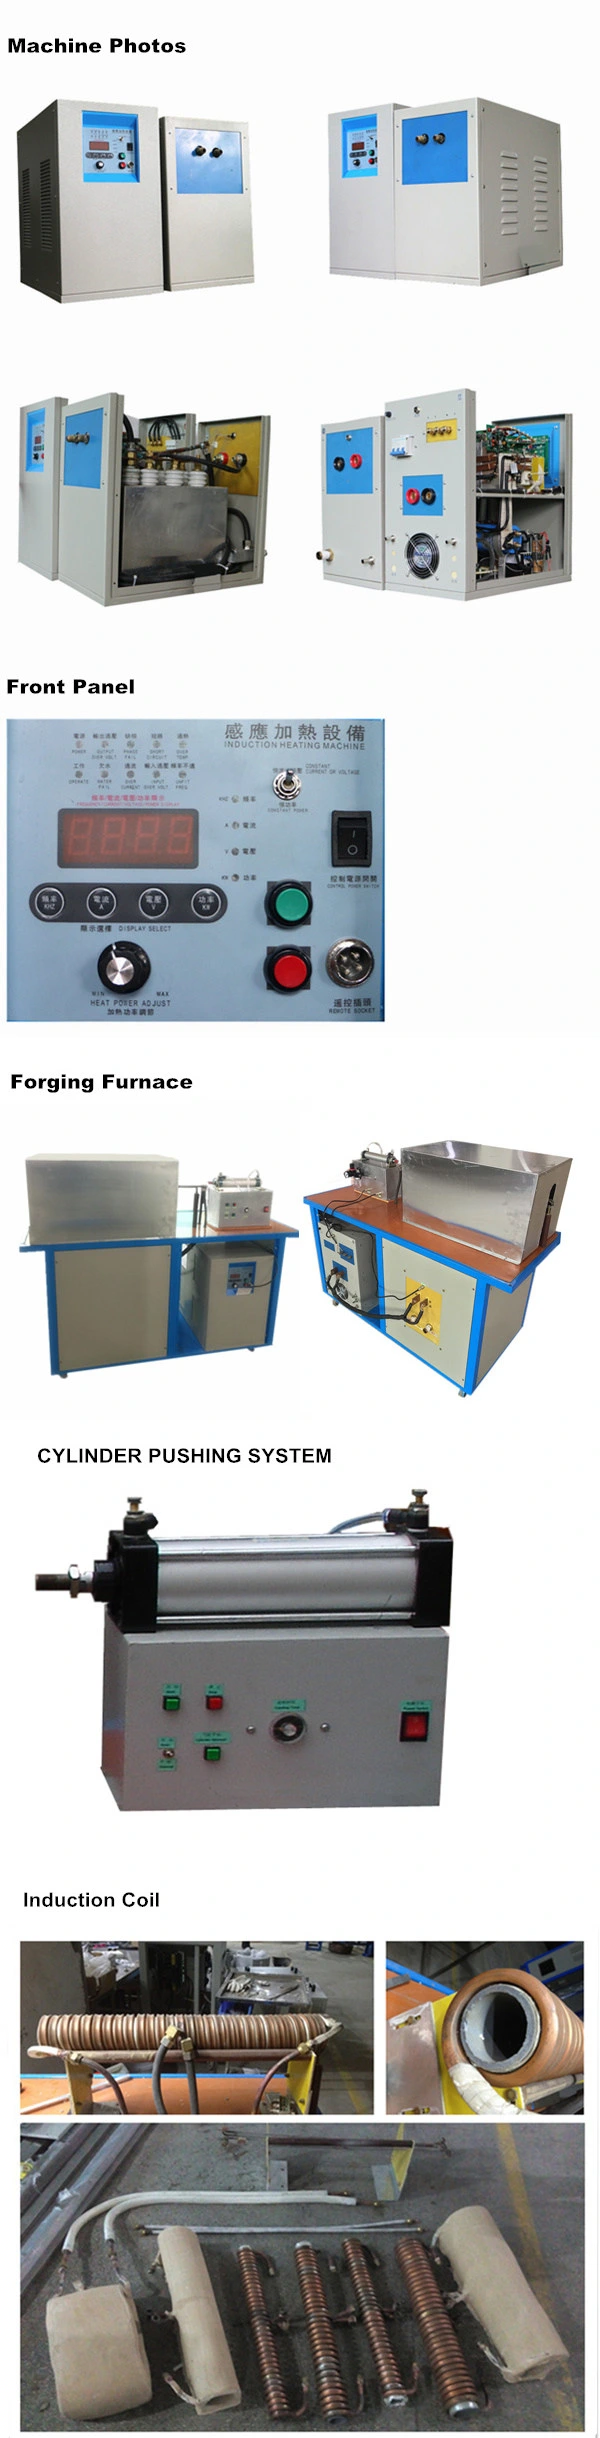 industrial Automatic Induction Forging Furnace with Vibrating Feeder (JLZ-70)